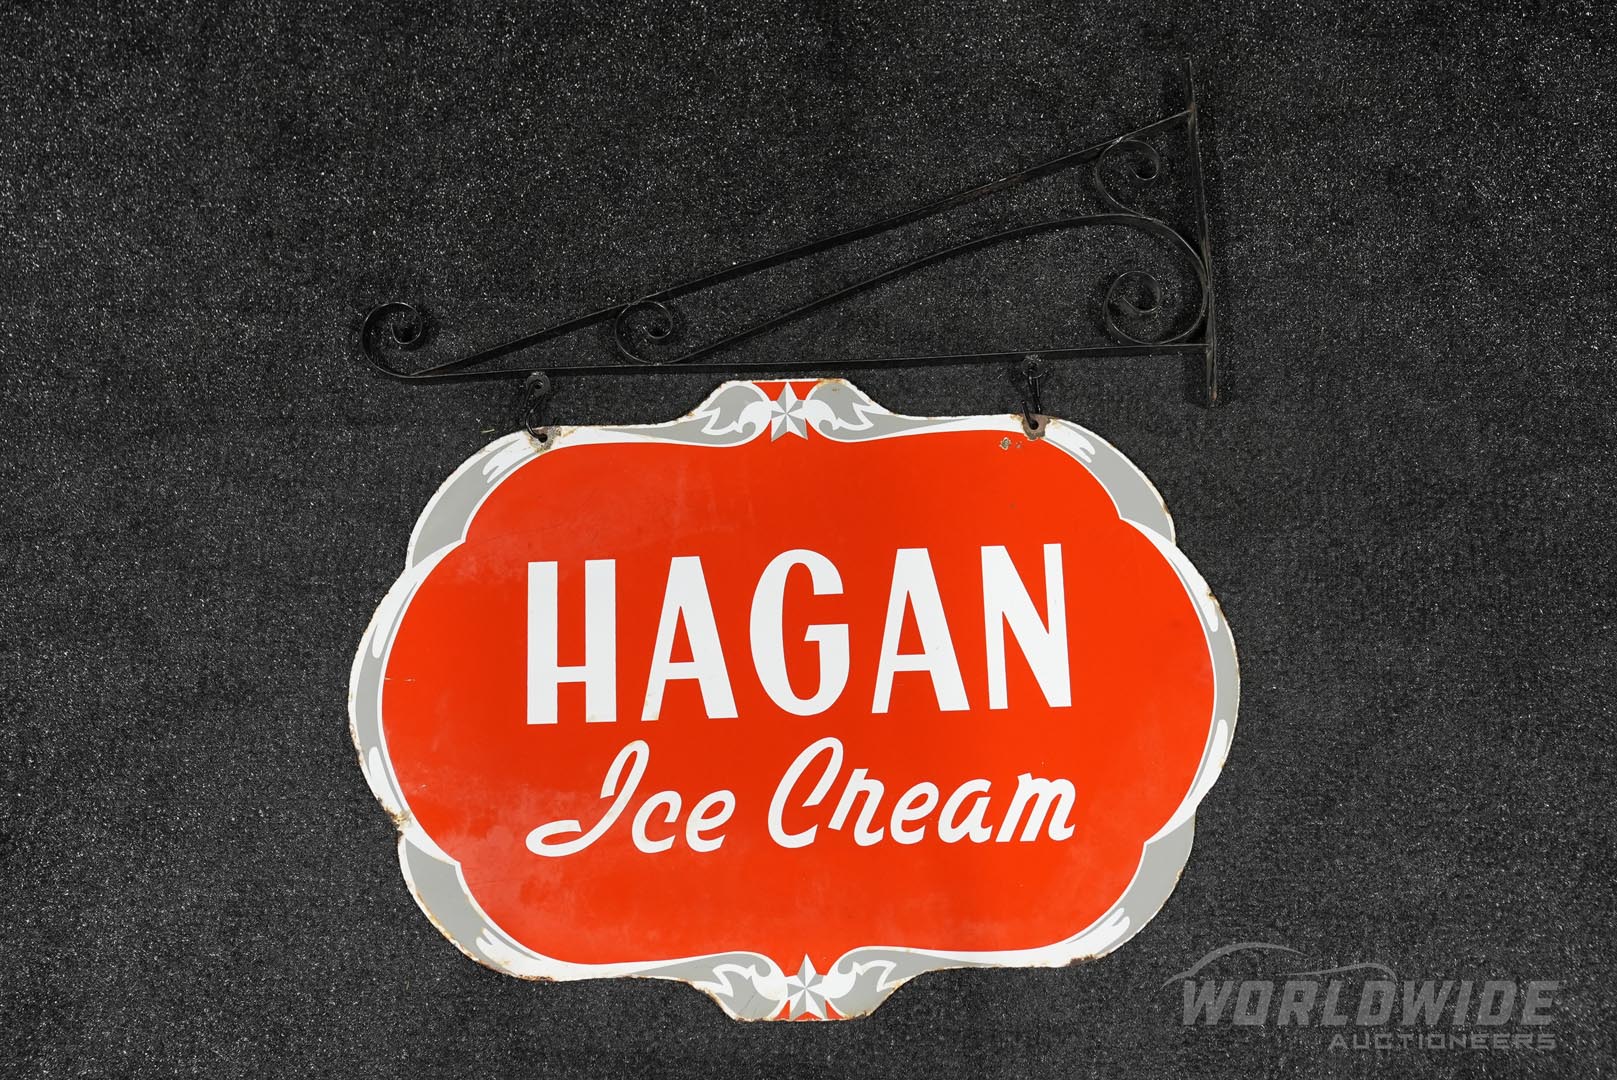  Original Hagan Ice Cream Doubl e-Sided Porcelain Sign with Wall Hanger 